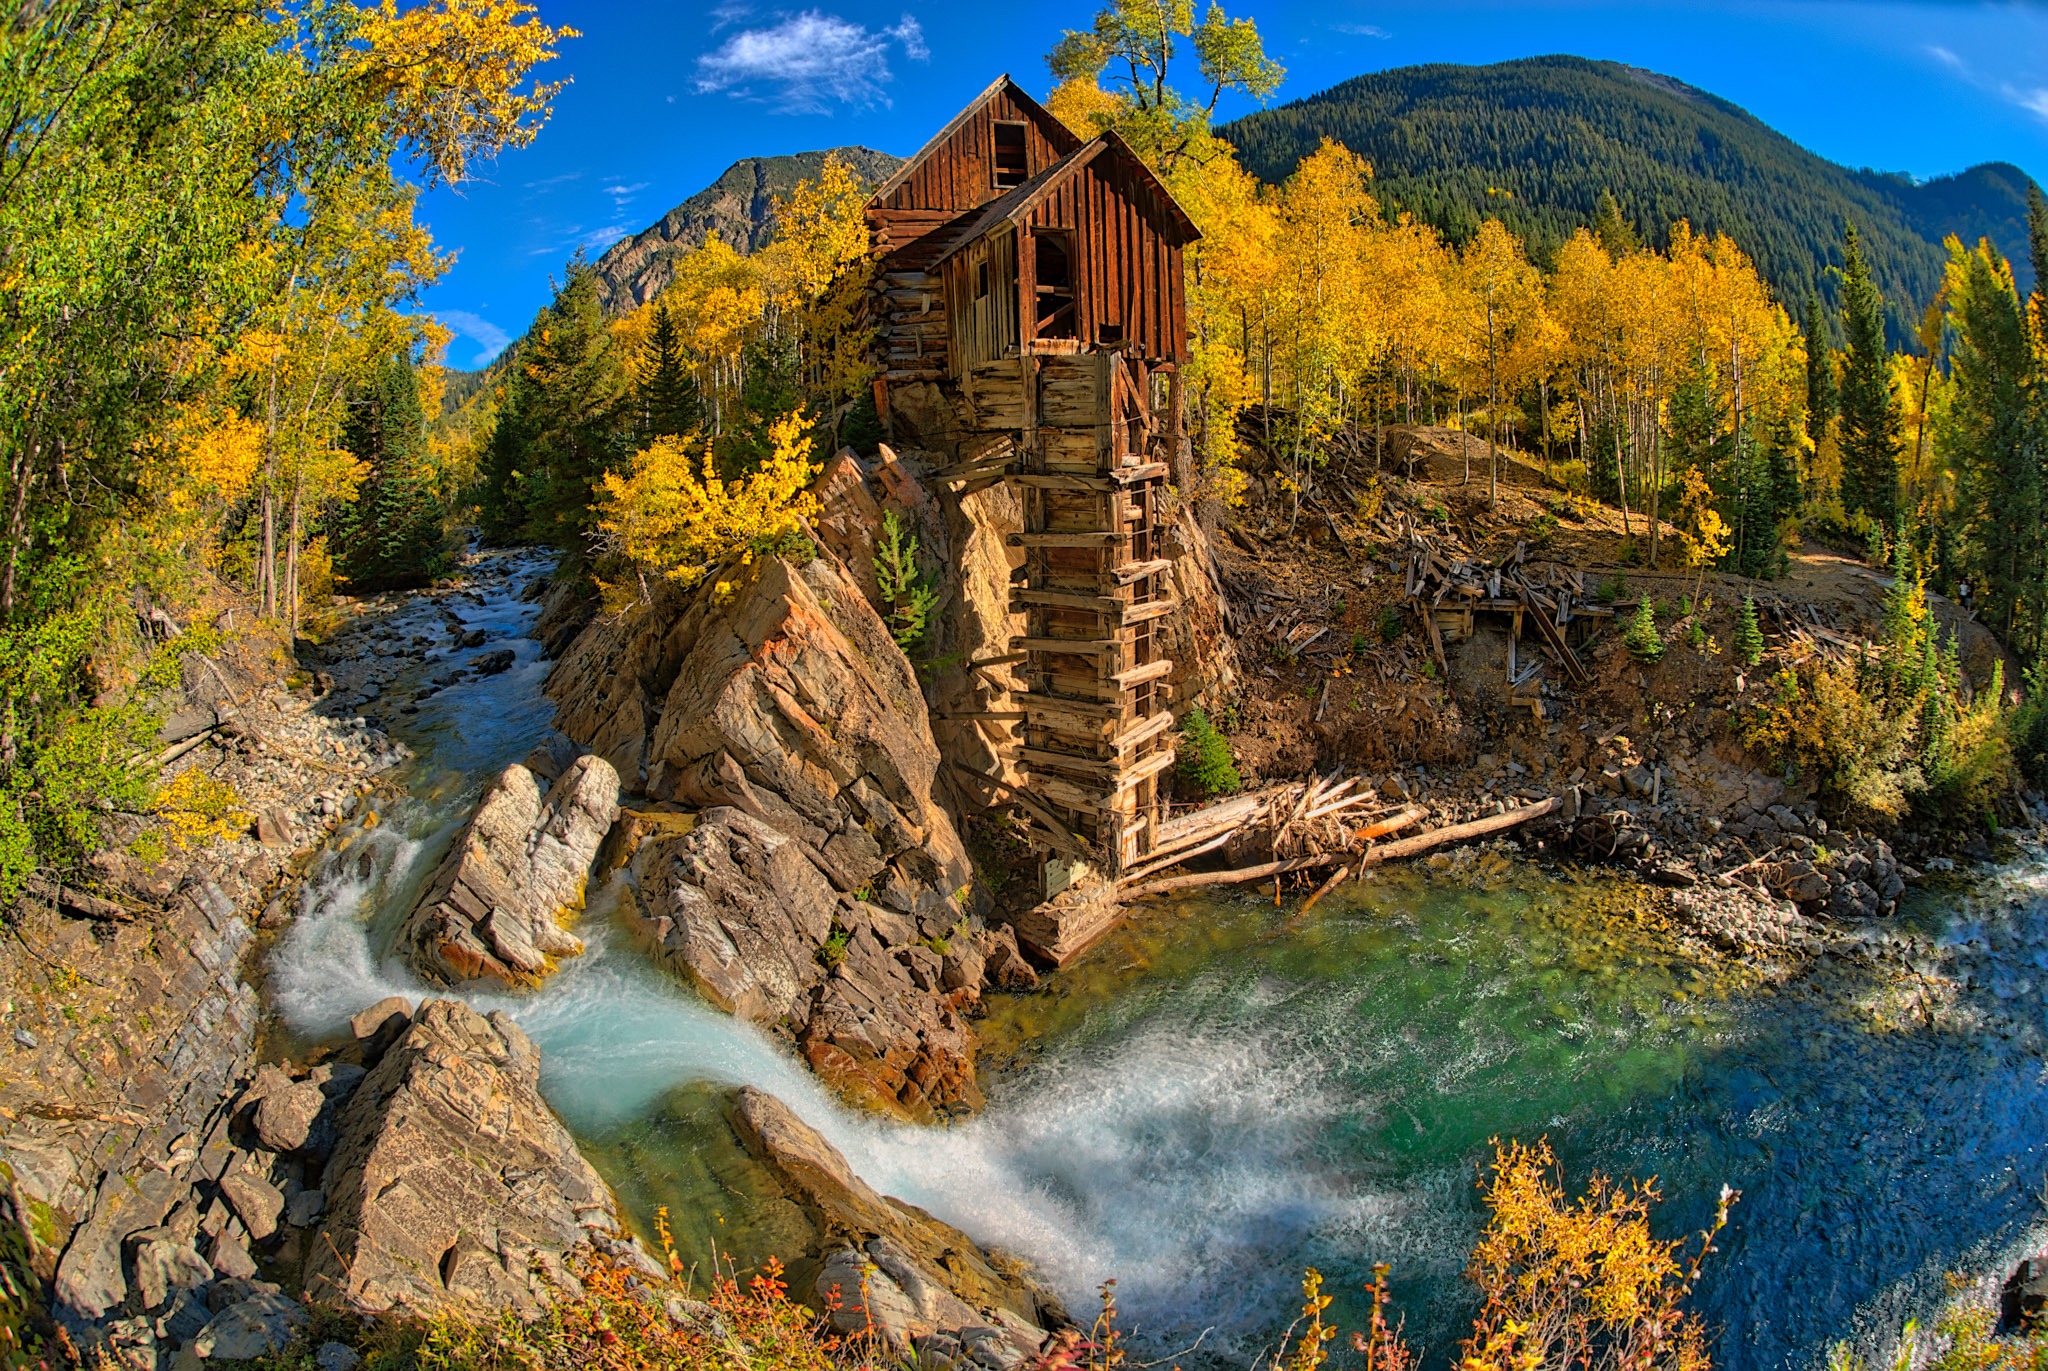 A wide-angle view of the old Crystal Powerhouse along the Crystal River near Marble, Colorado.